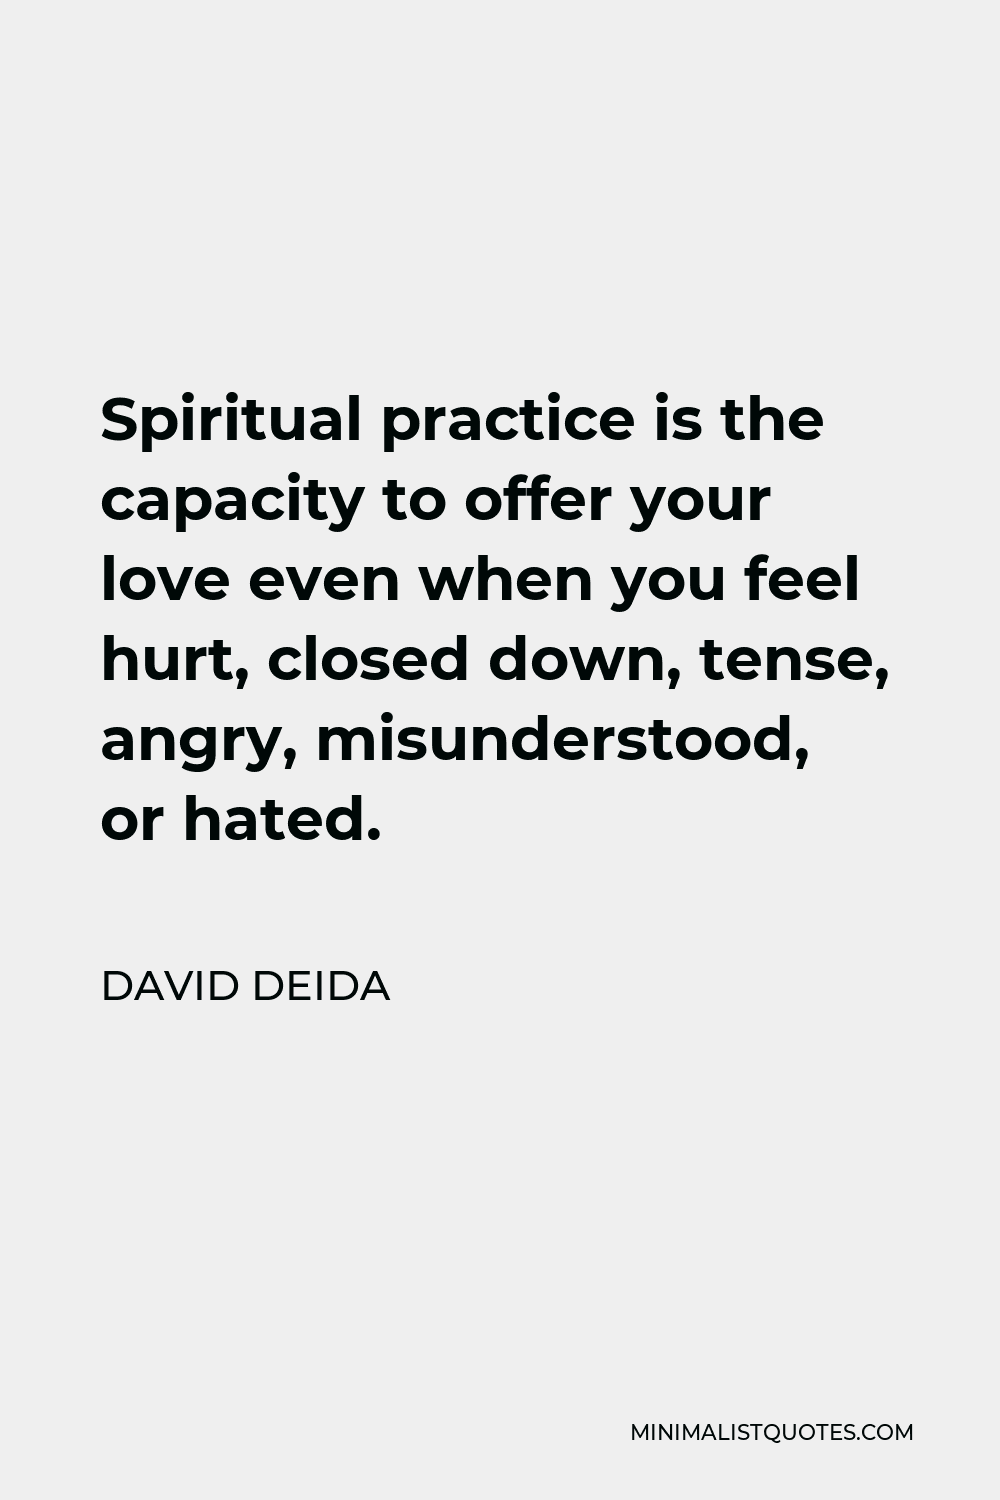 David Deida Quote - Spiritual practice is the capacity to offer your love even when you feel hurt, closed down, tense, angry, misunderstood, or hated.